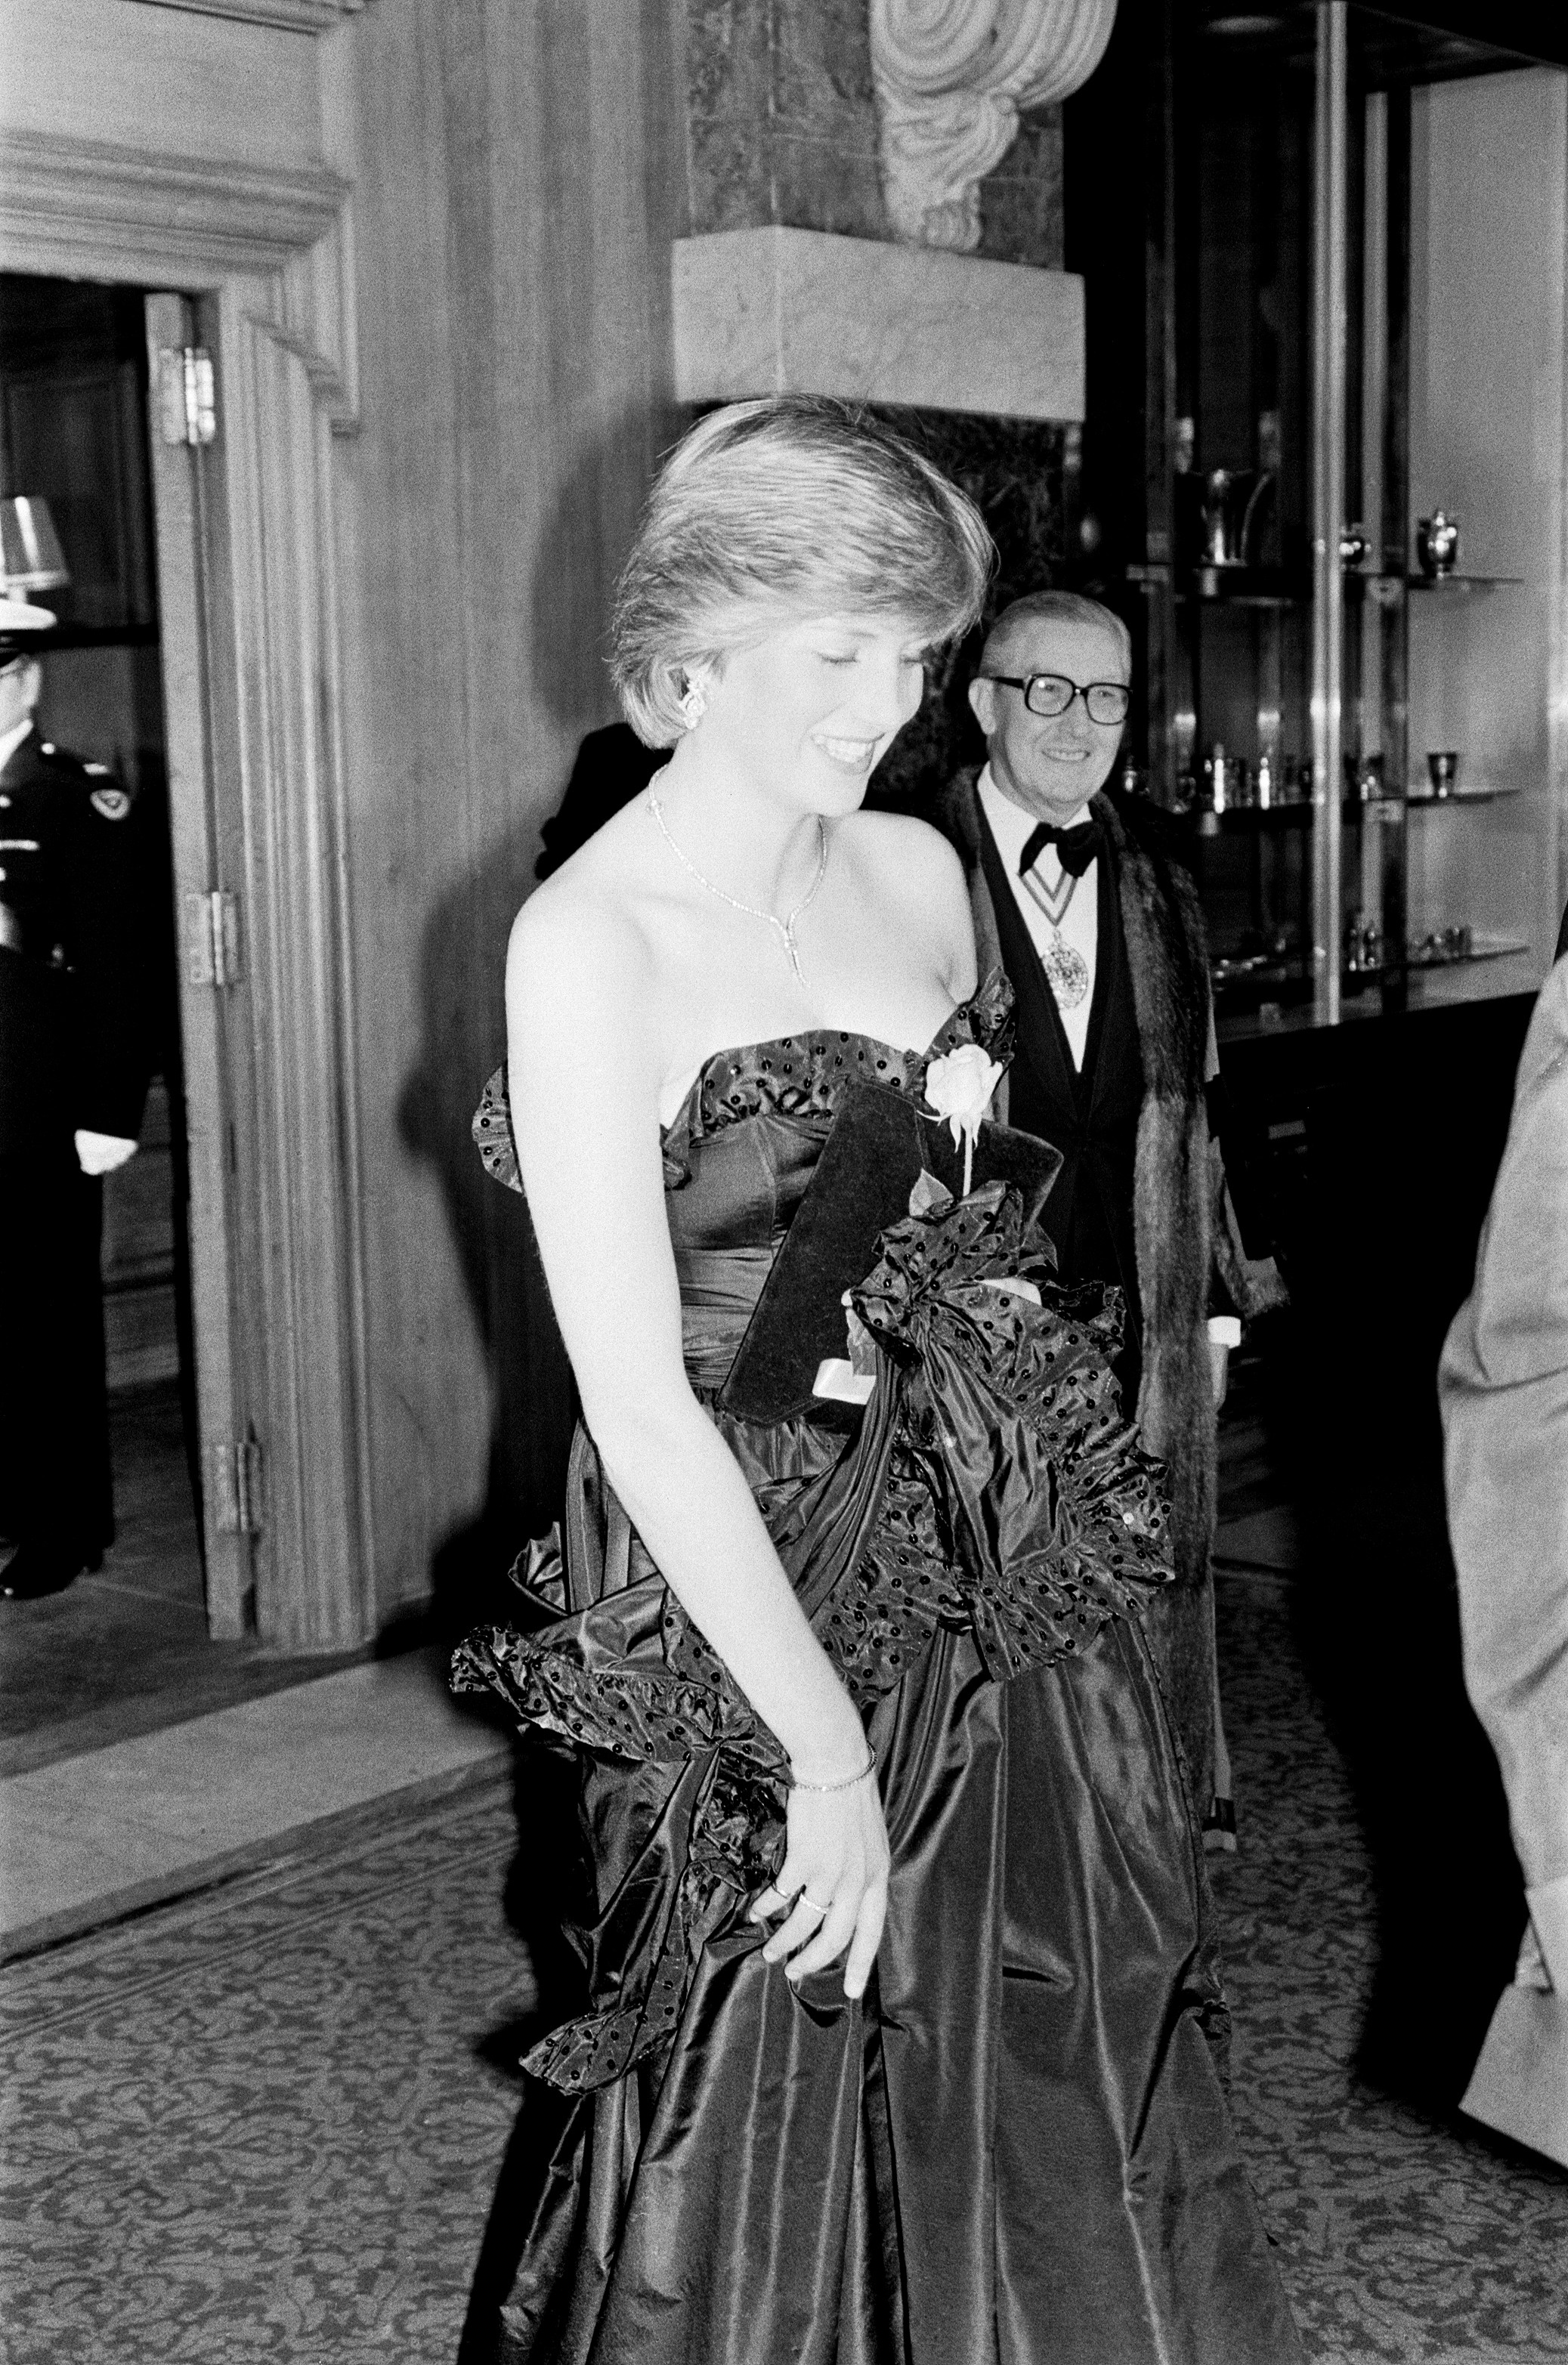 Lady Diana Spencer attended her first public engagement tonight, when she joined Prince Charles at a Gala Charity Concert at the Goldsmith's Hall, London, in aid of the Royal Opera House. Princess Grace of Monaco also attends the event, as seen in other f (Foto: Getty Images)